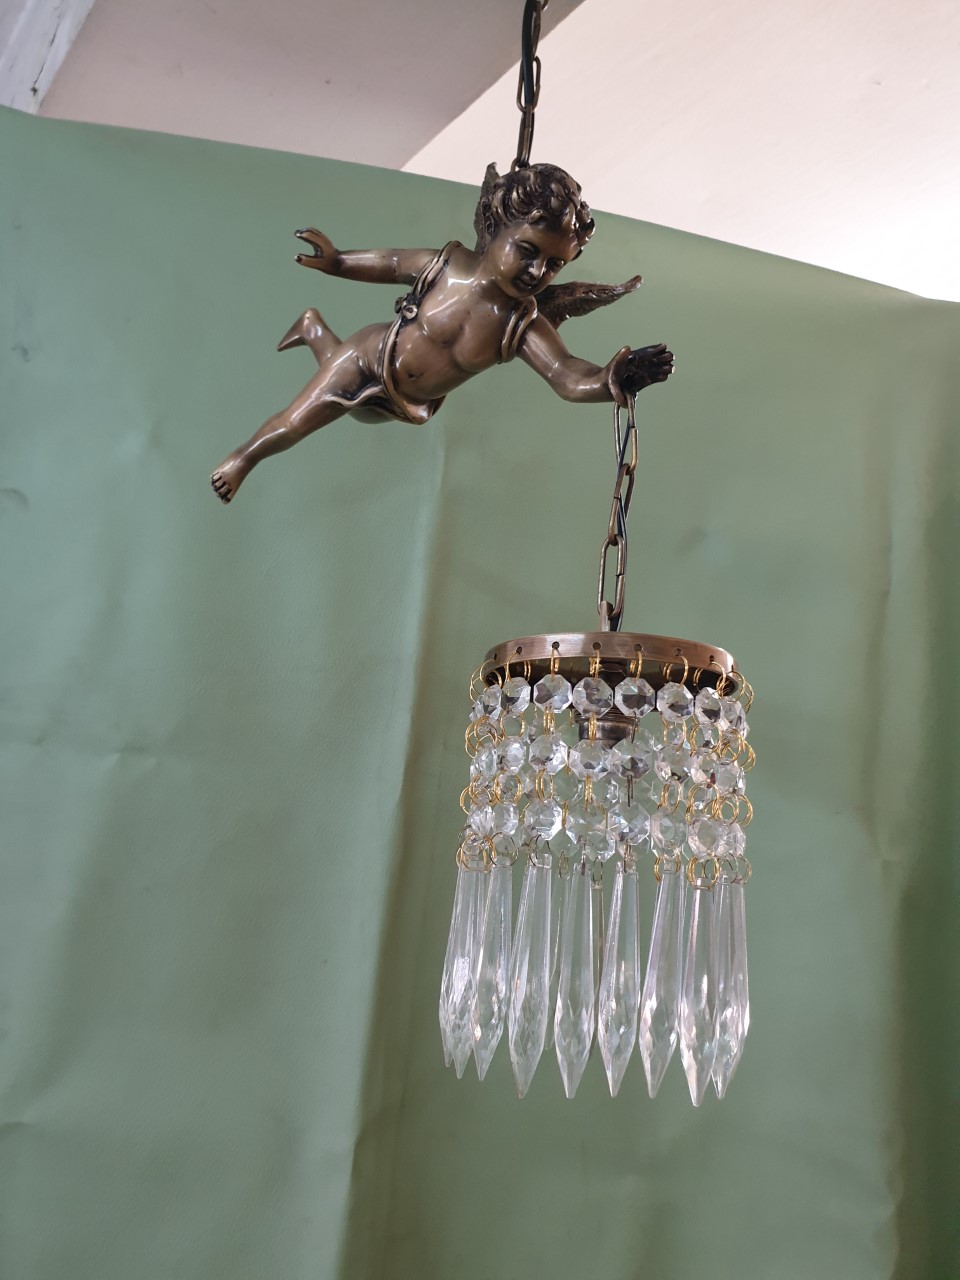 Cupids Hanging Lamp with crystal Item Code HGLA018 size long 270 mm.